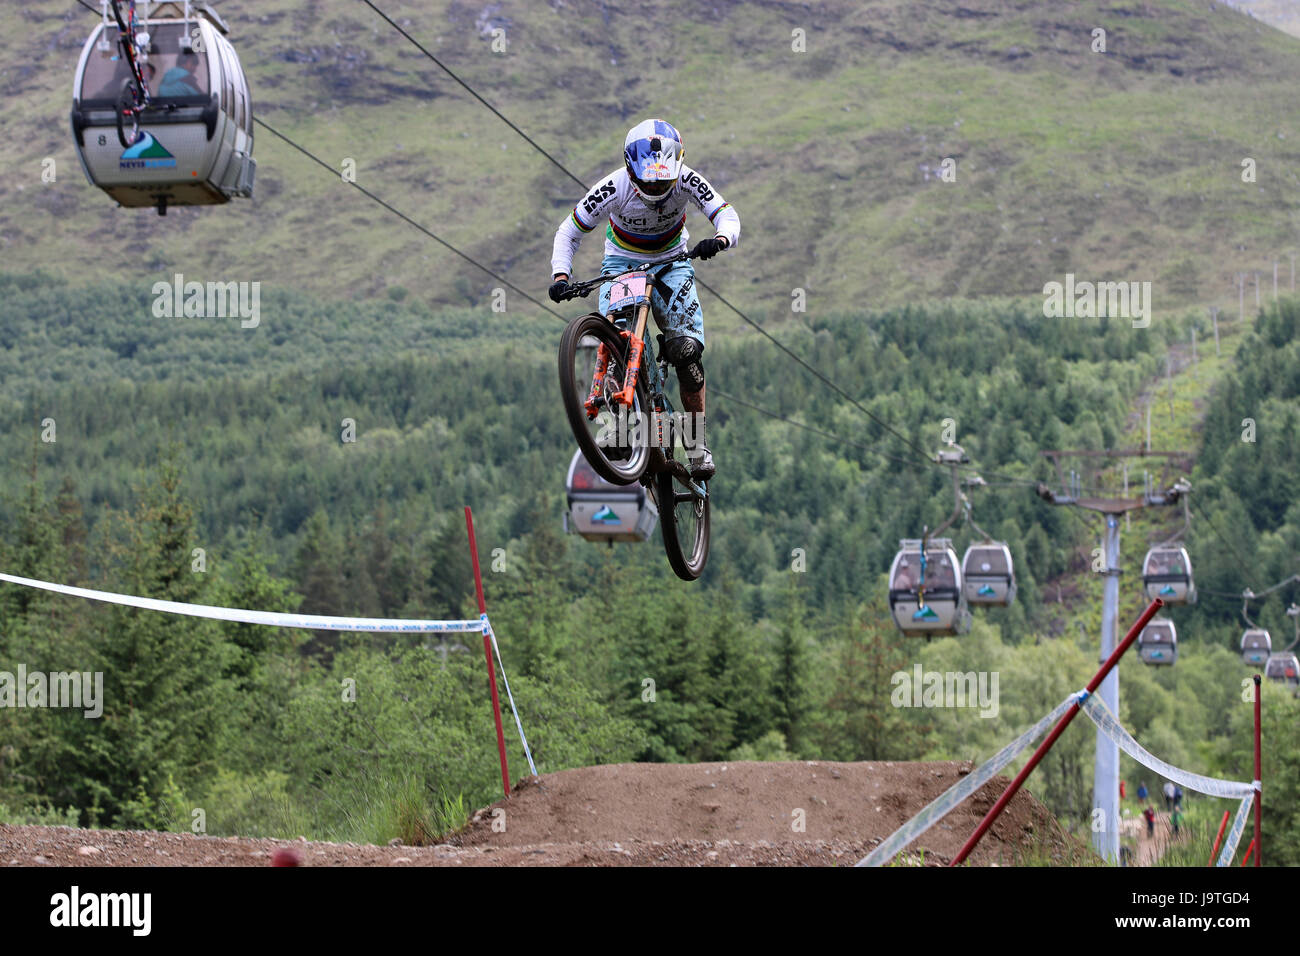 Fort William, Scotland. 3rd June, 2017. Rachel Atherton GBR taking on the jumps during practice for Sunday's Downhill World Cup race. © Malcolm Gallon/Alamy Live News Stock Photo